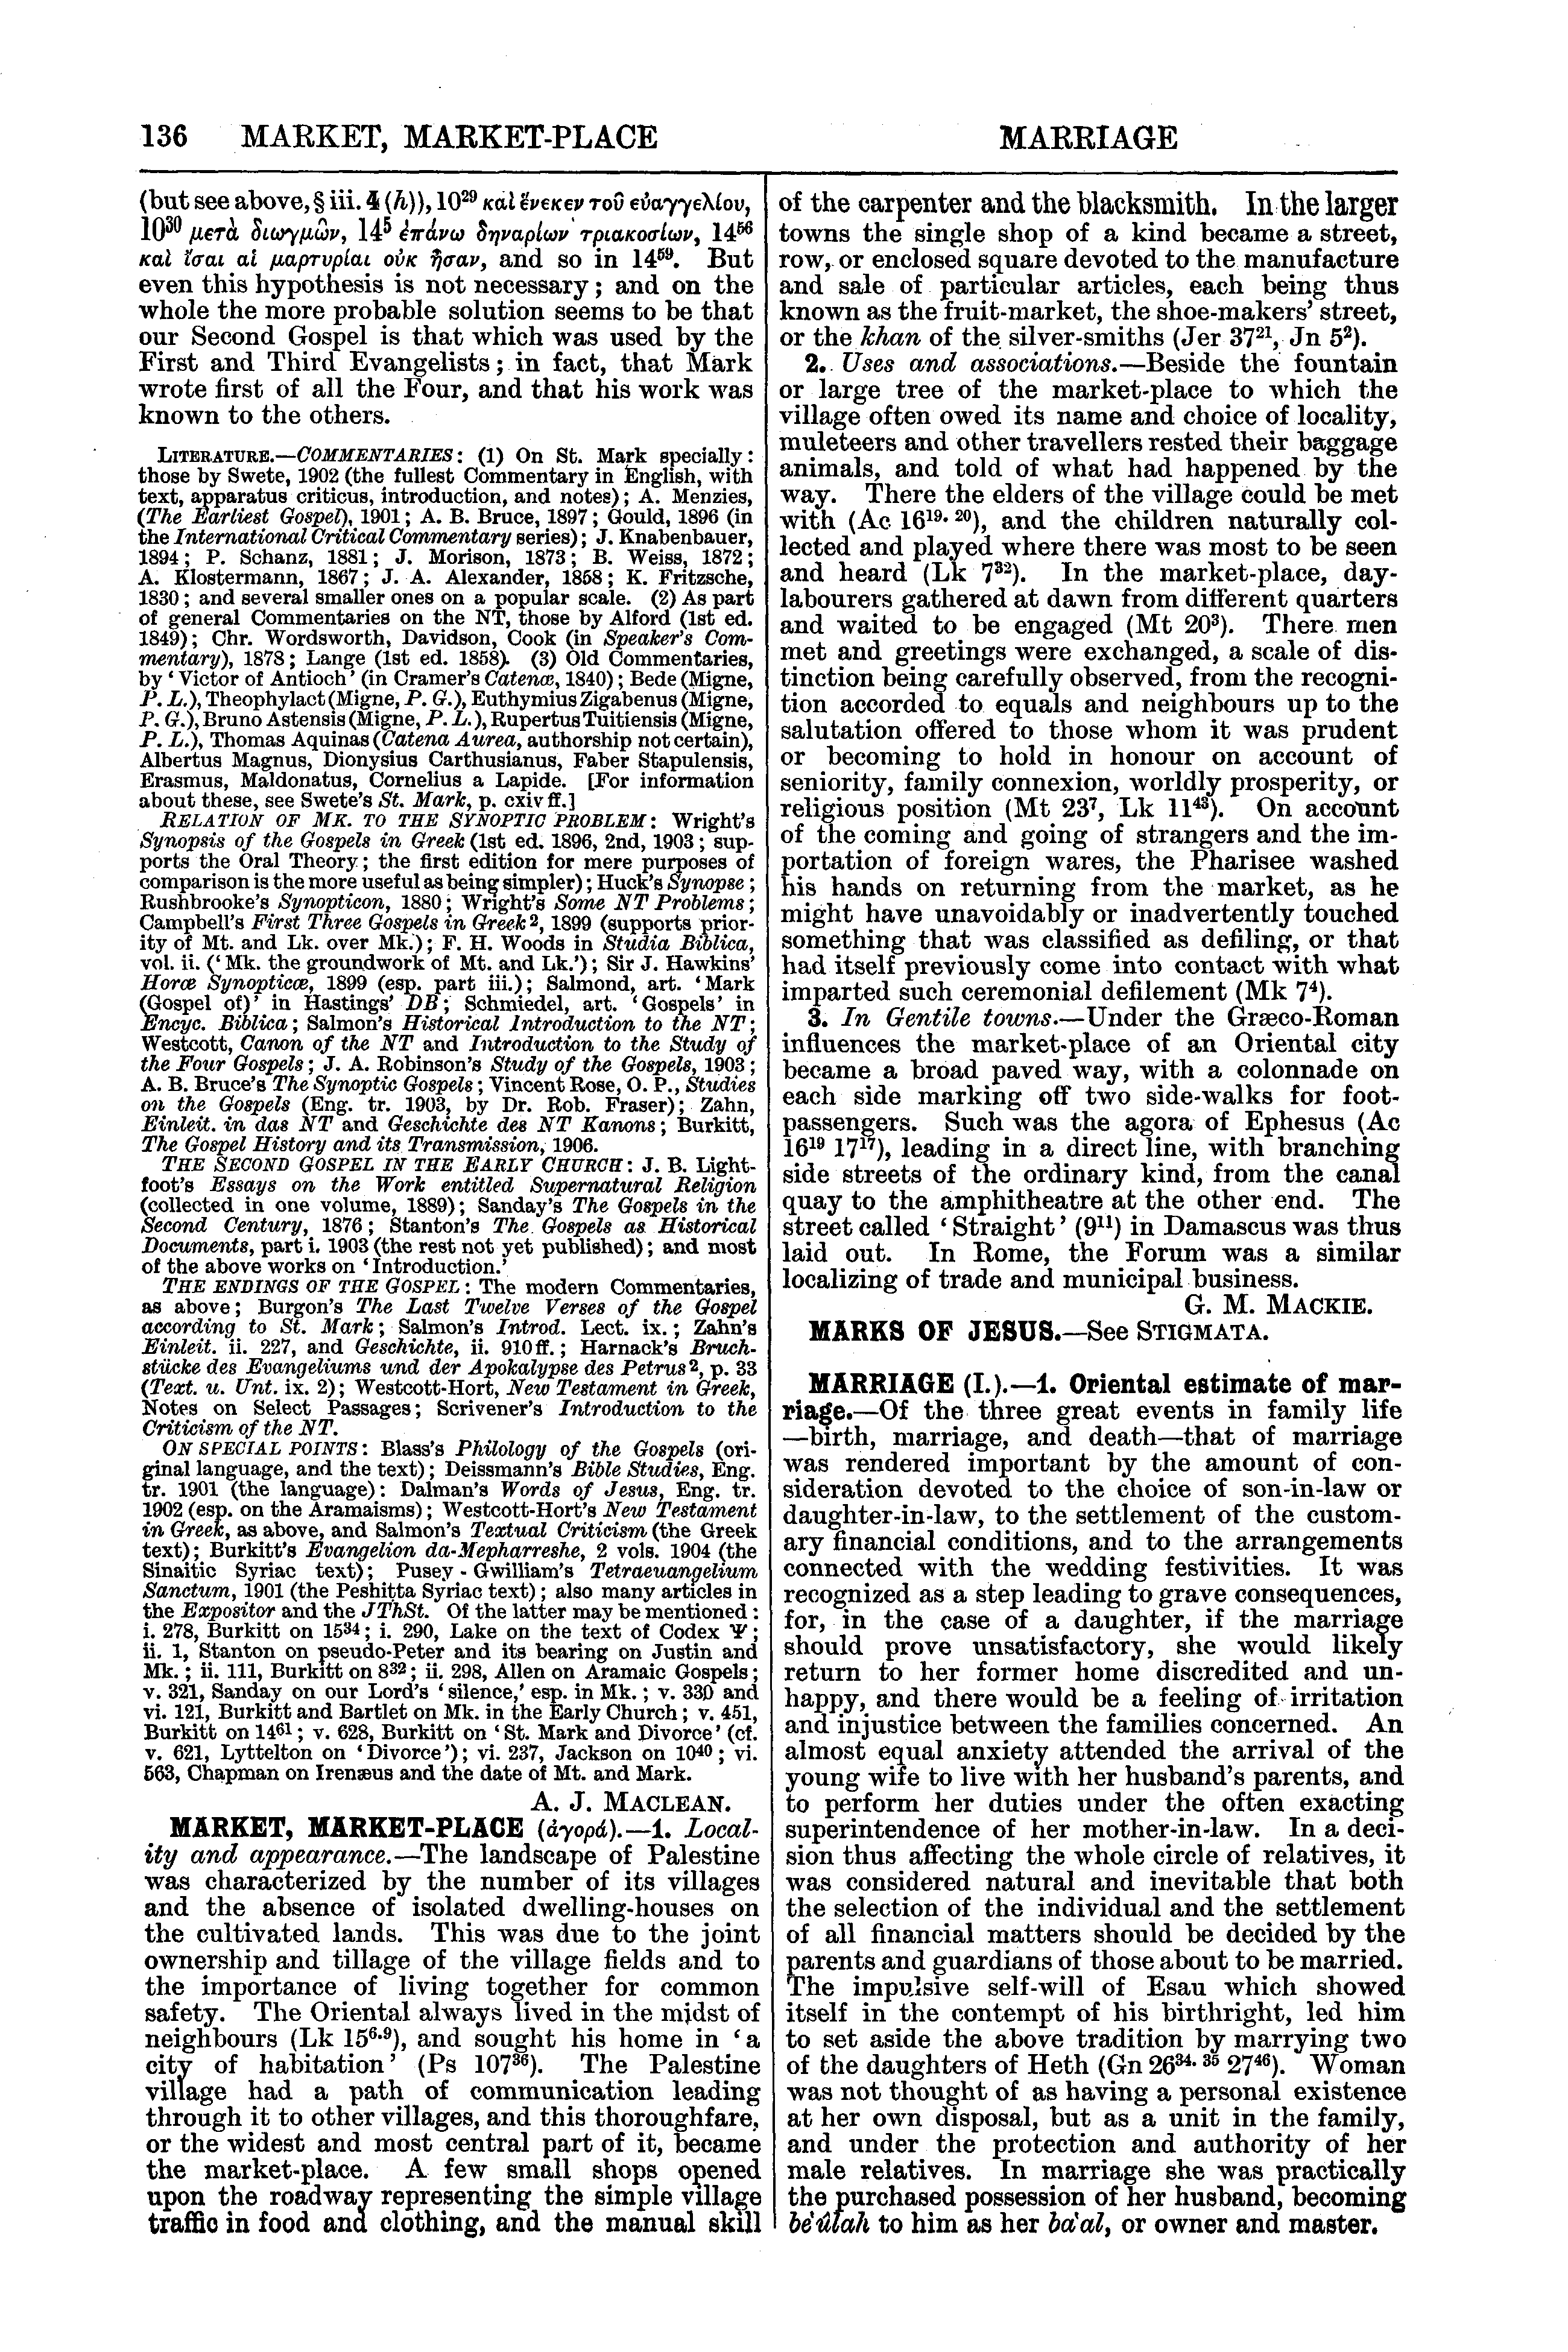 Image of page 136